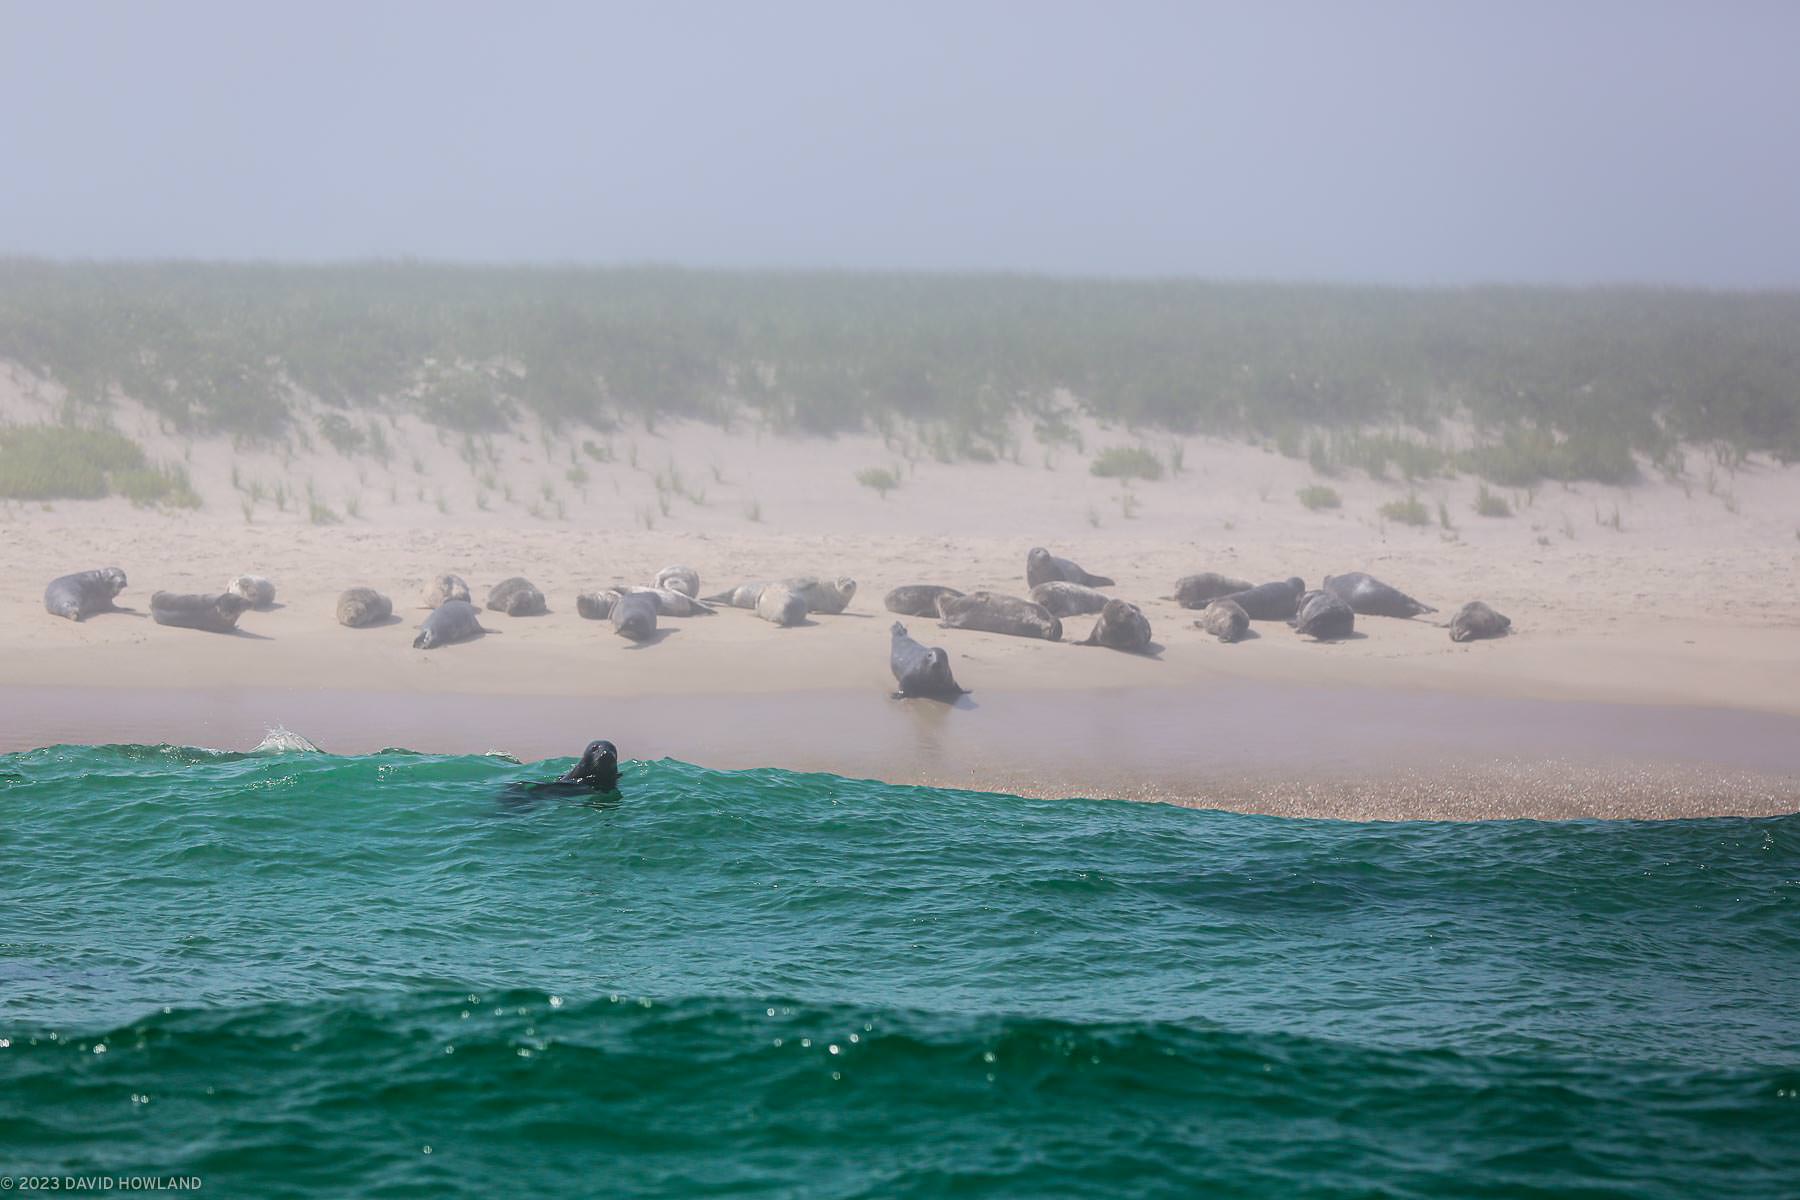 A photo of a seal floating in the waves at Monomoy Point with a larger group of seals lying on the beach in the background.